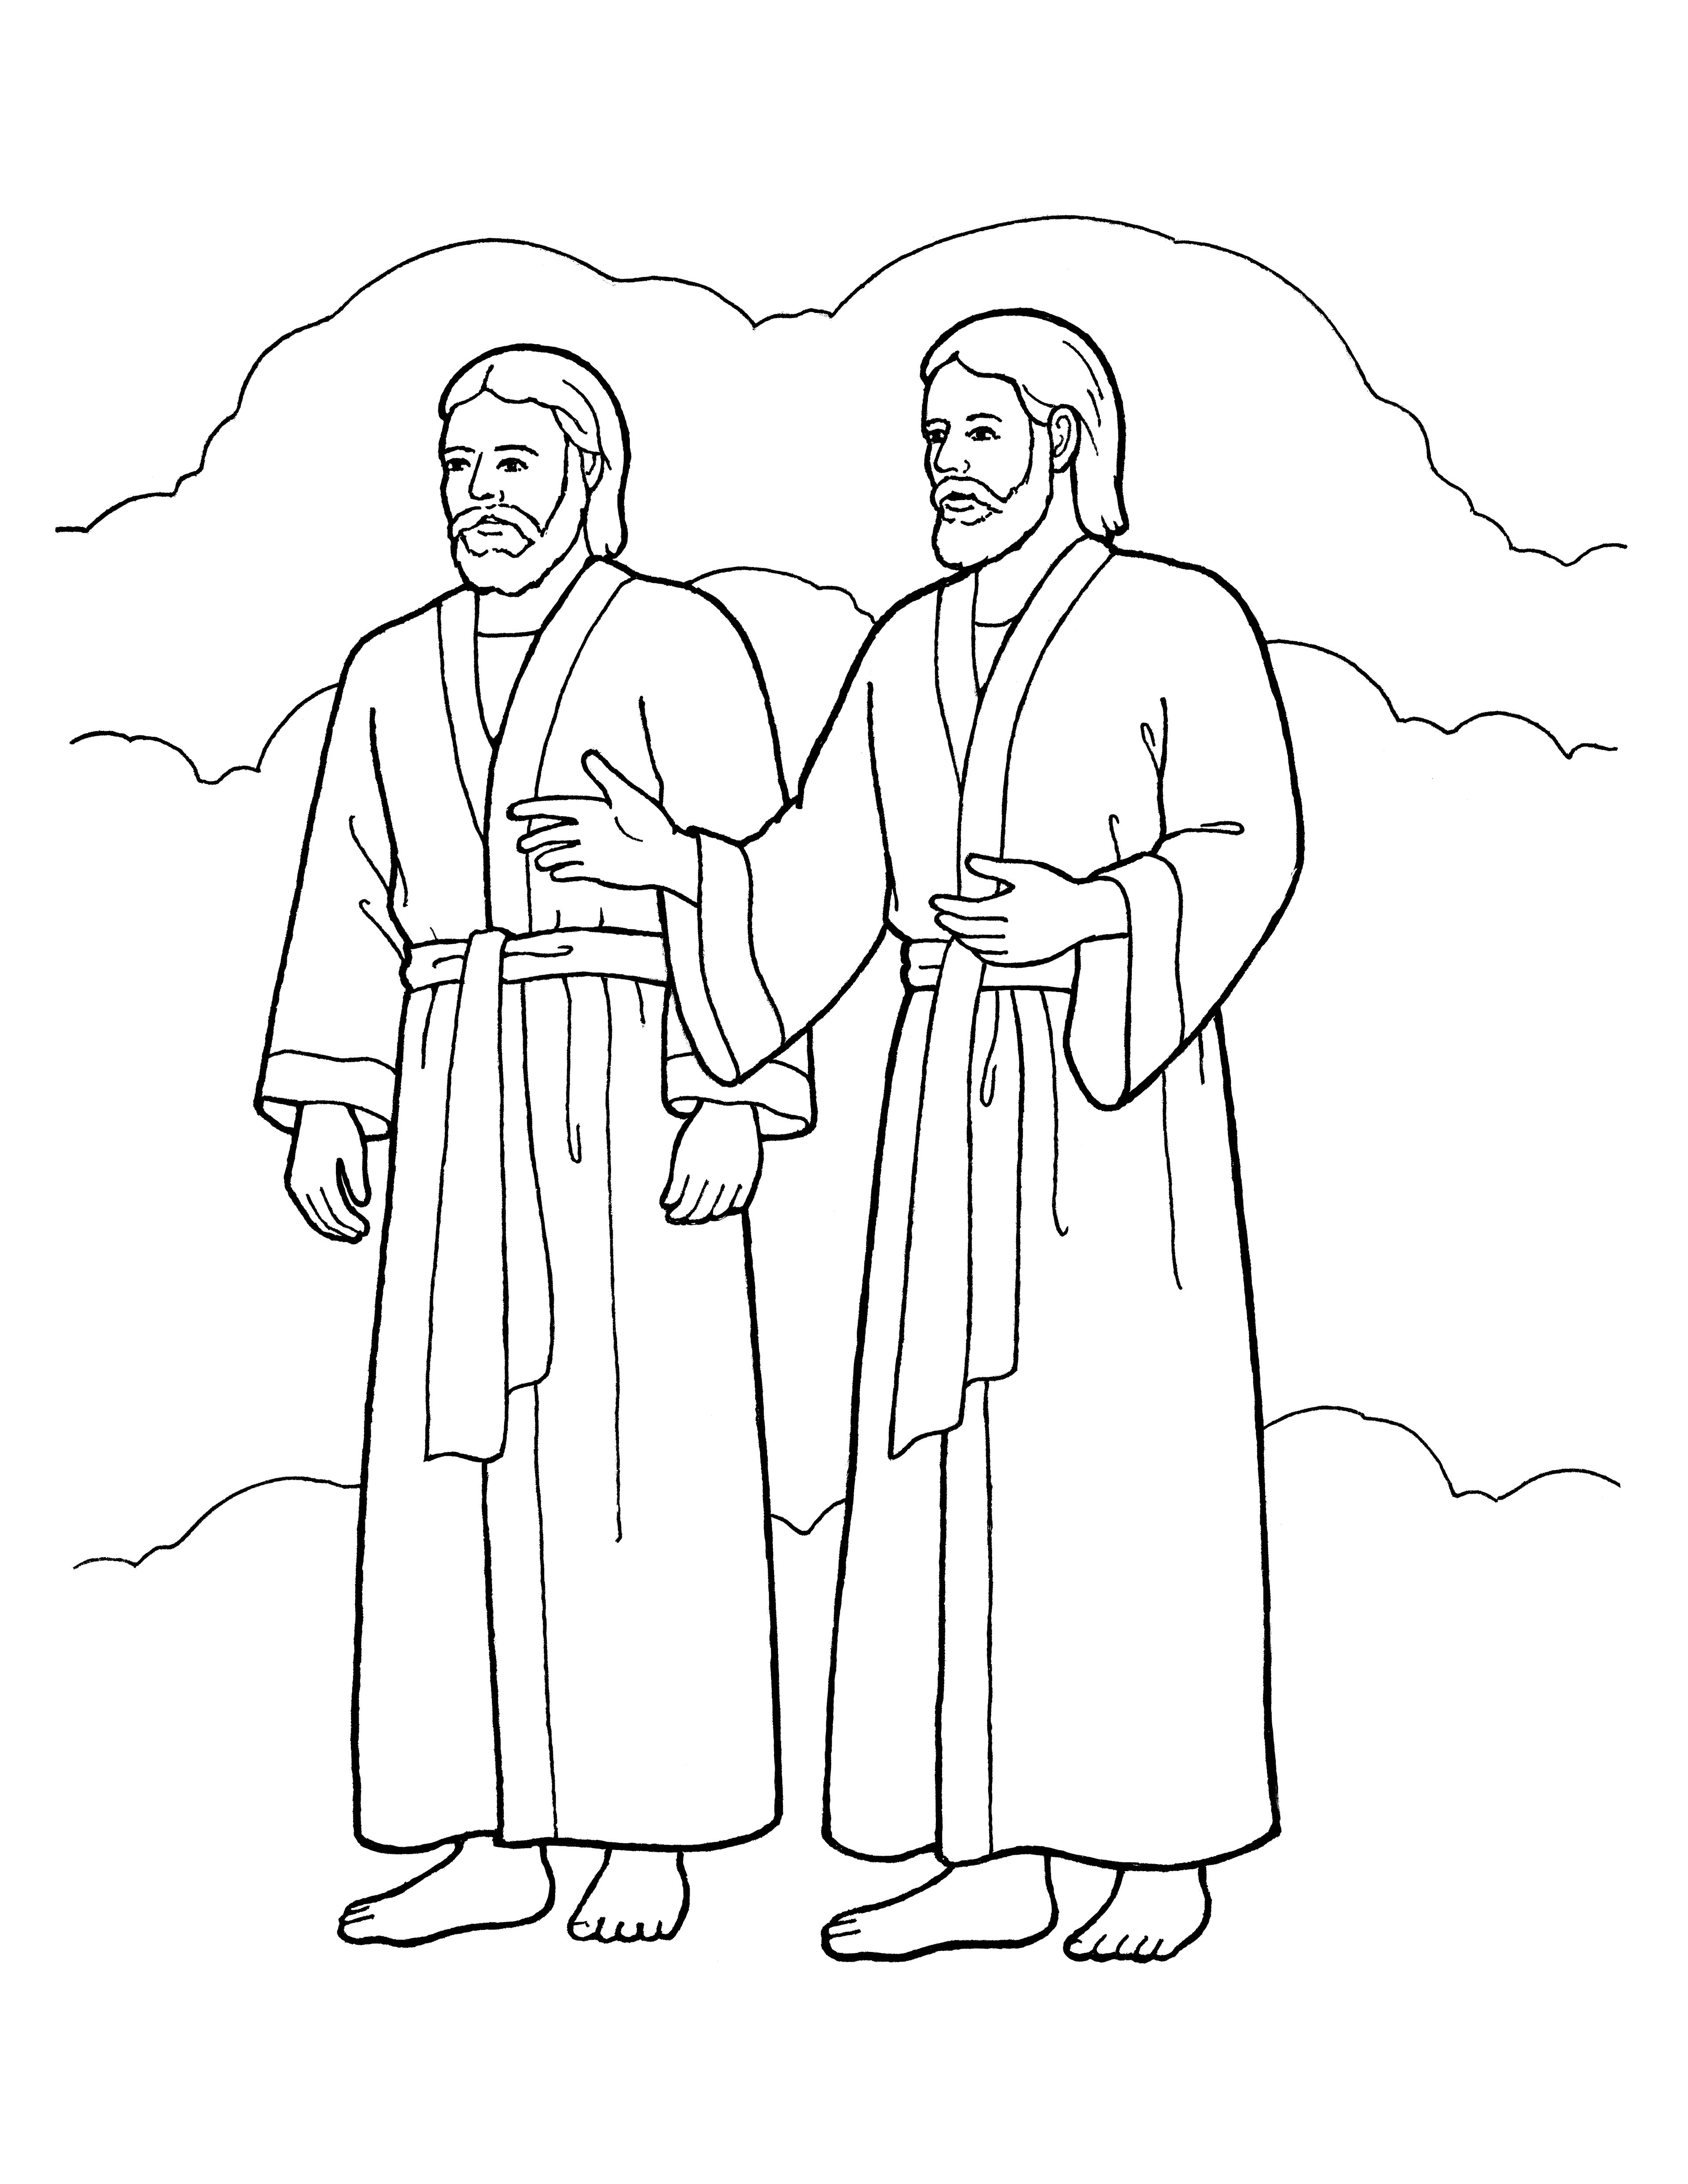 An illustration of the first article of faith—“Godhead” (Heavenly Father and Jesus Christ).